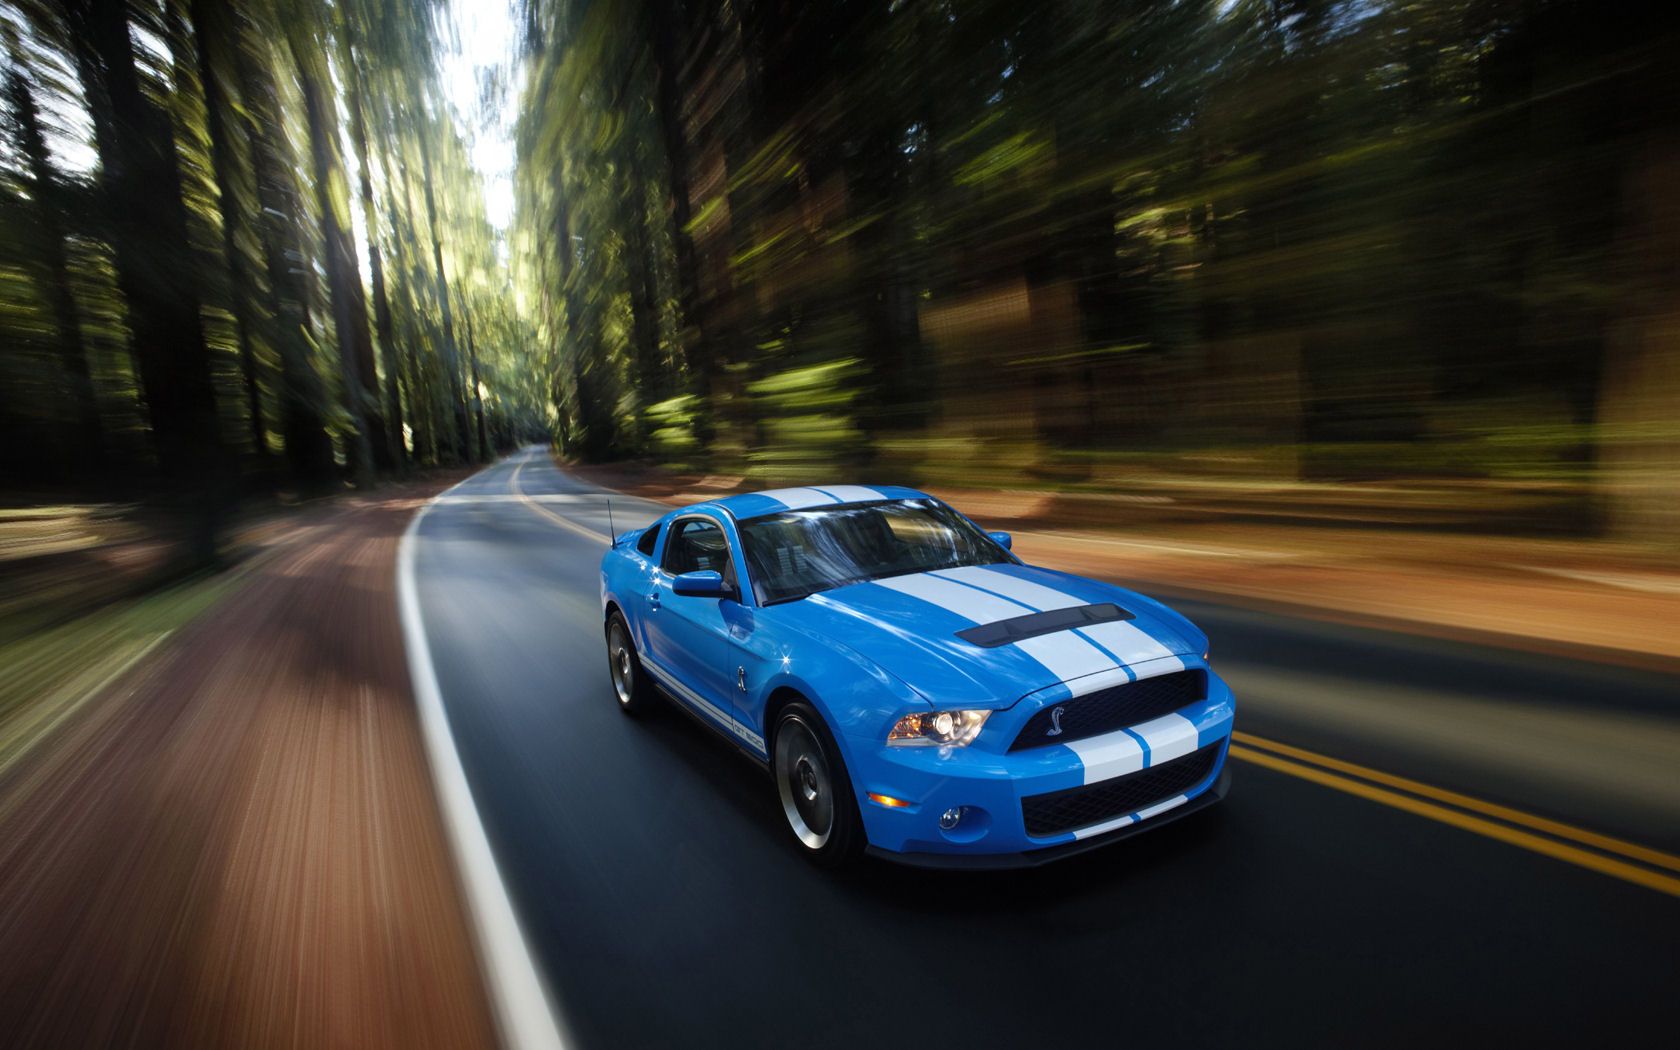 Ford Mustang, Shelby GT Convertible Widescreen Wallpaper / Desktop Background Picture